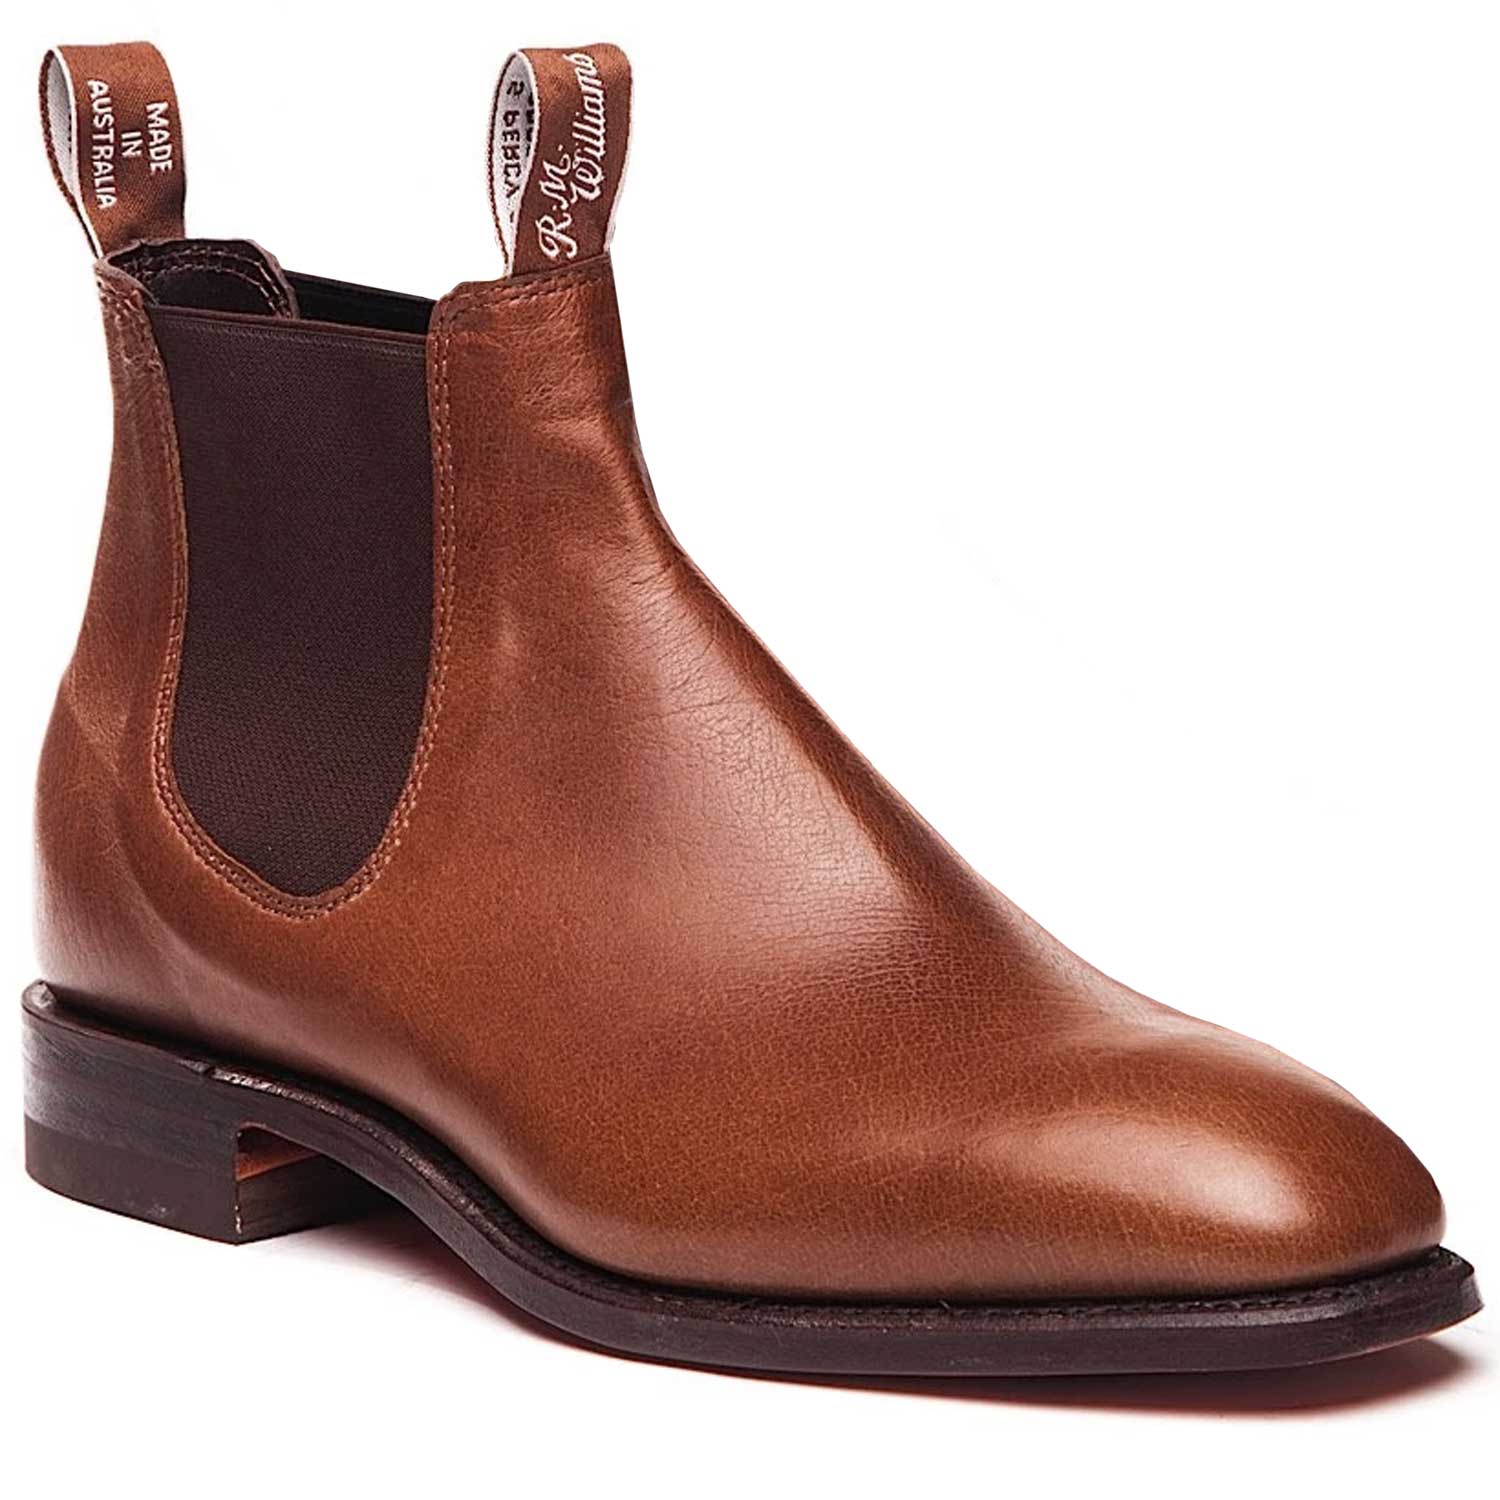 rm williams cowboy boots